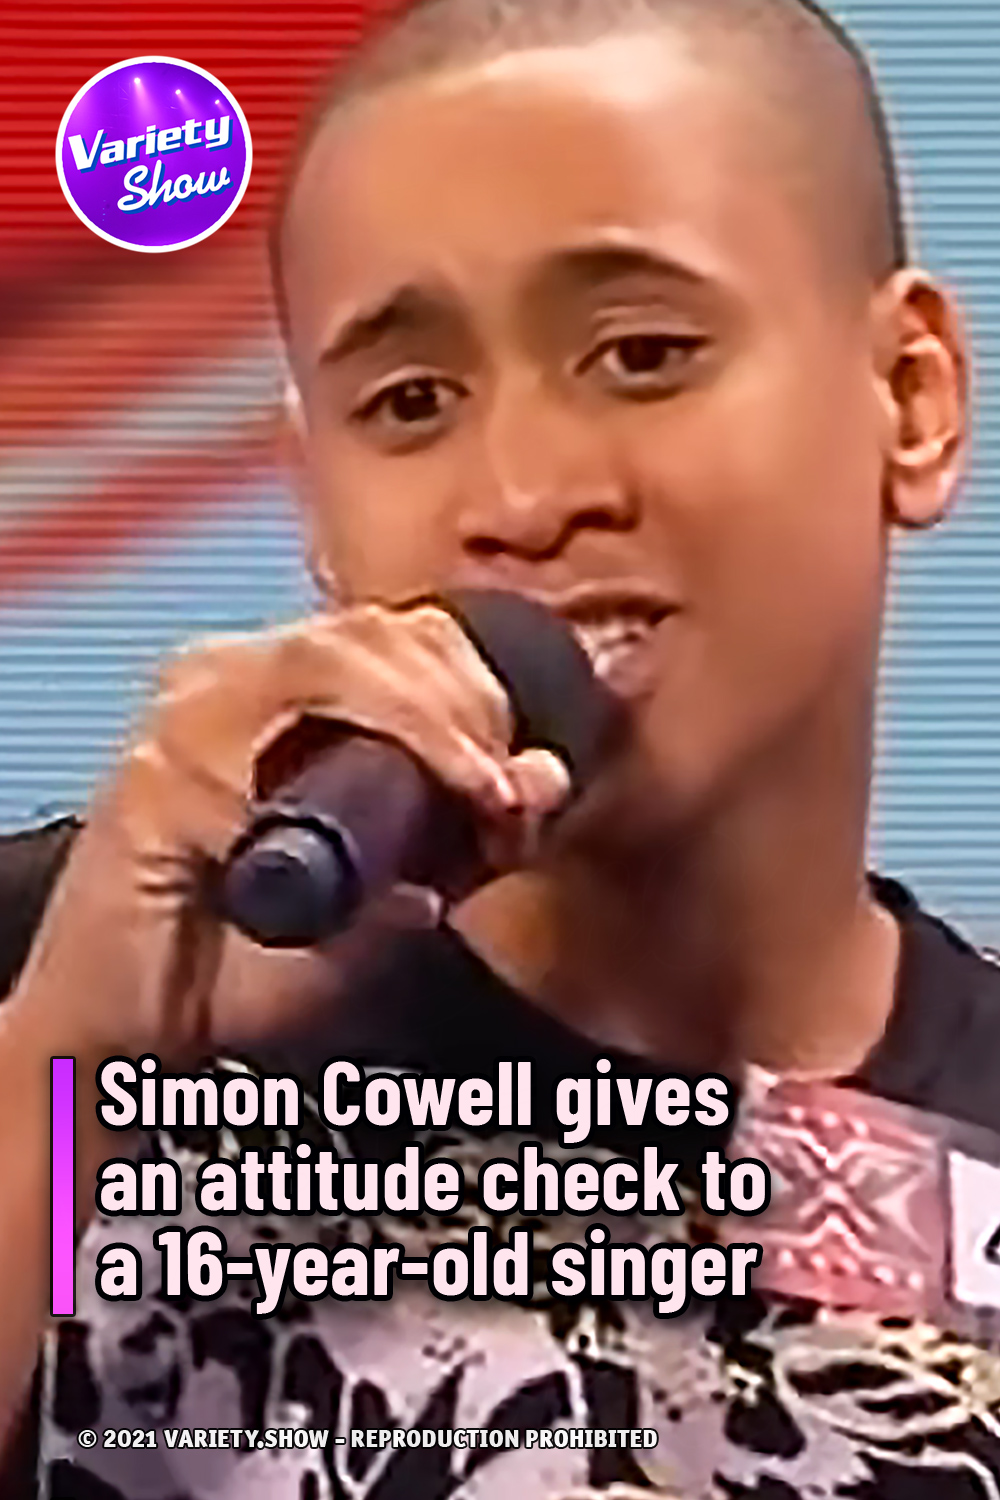 Simon Cowell gives an attitude check to a 16-year-old singer